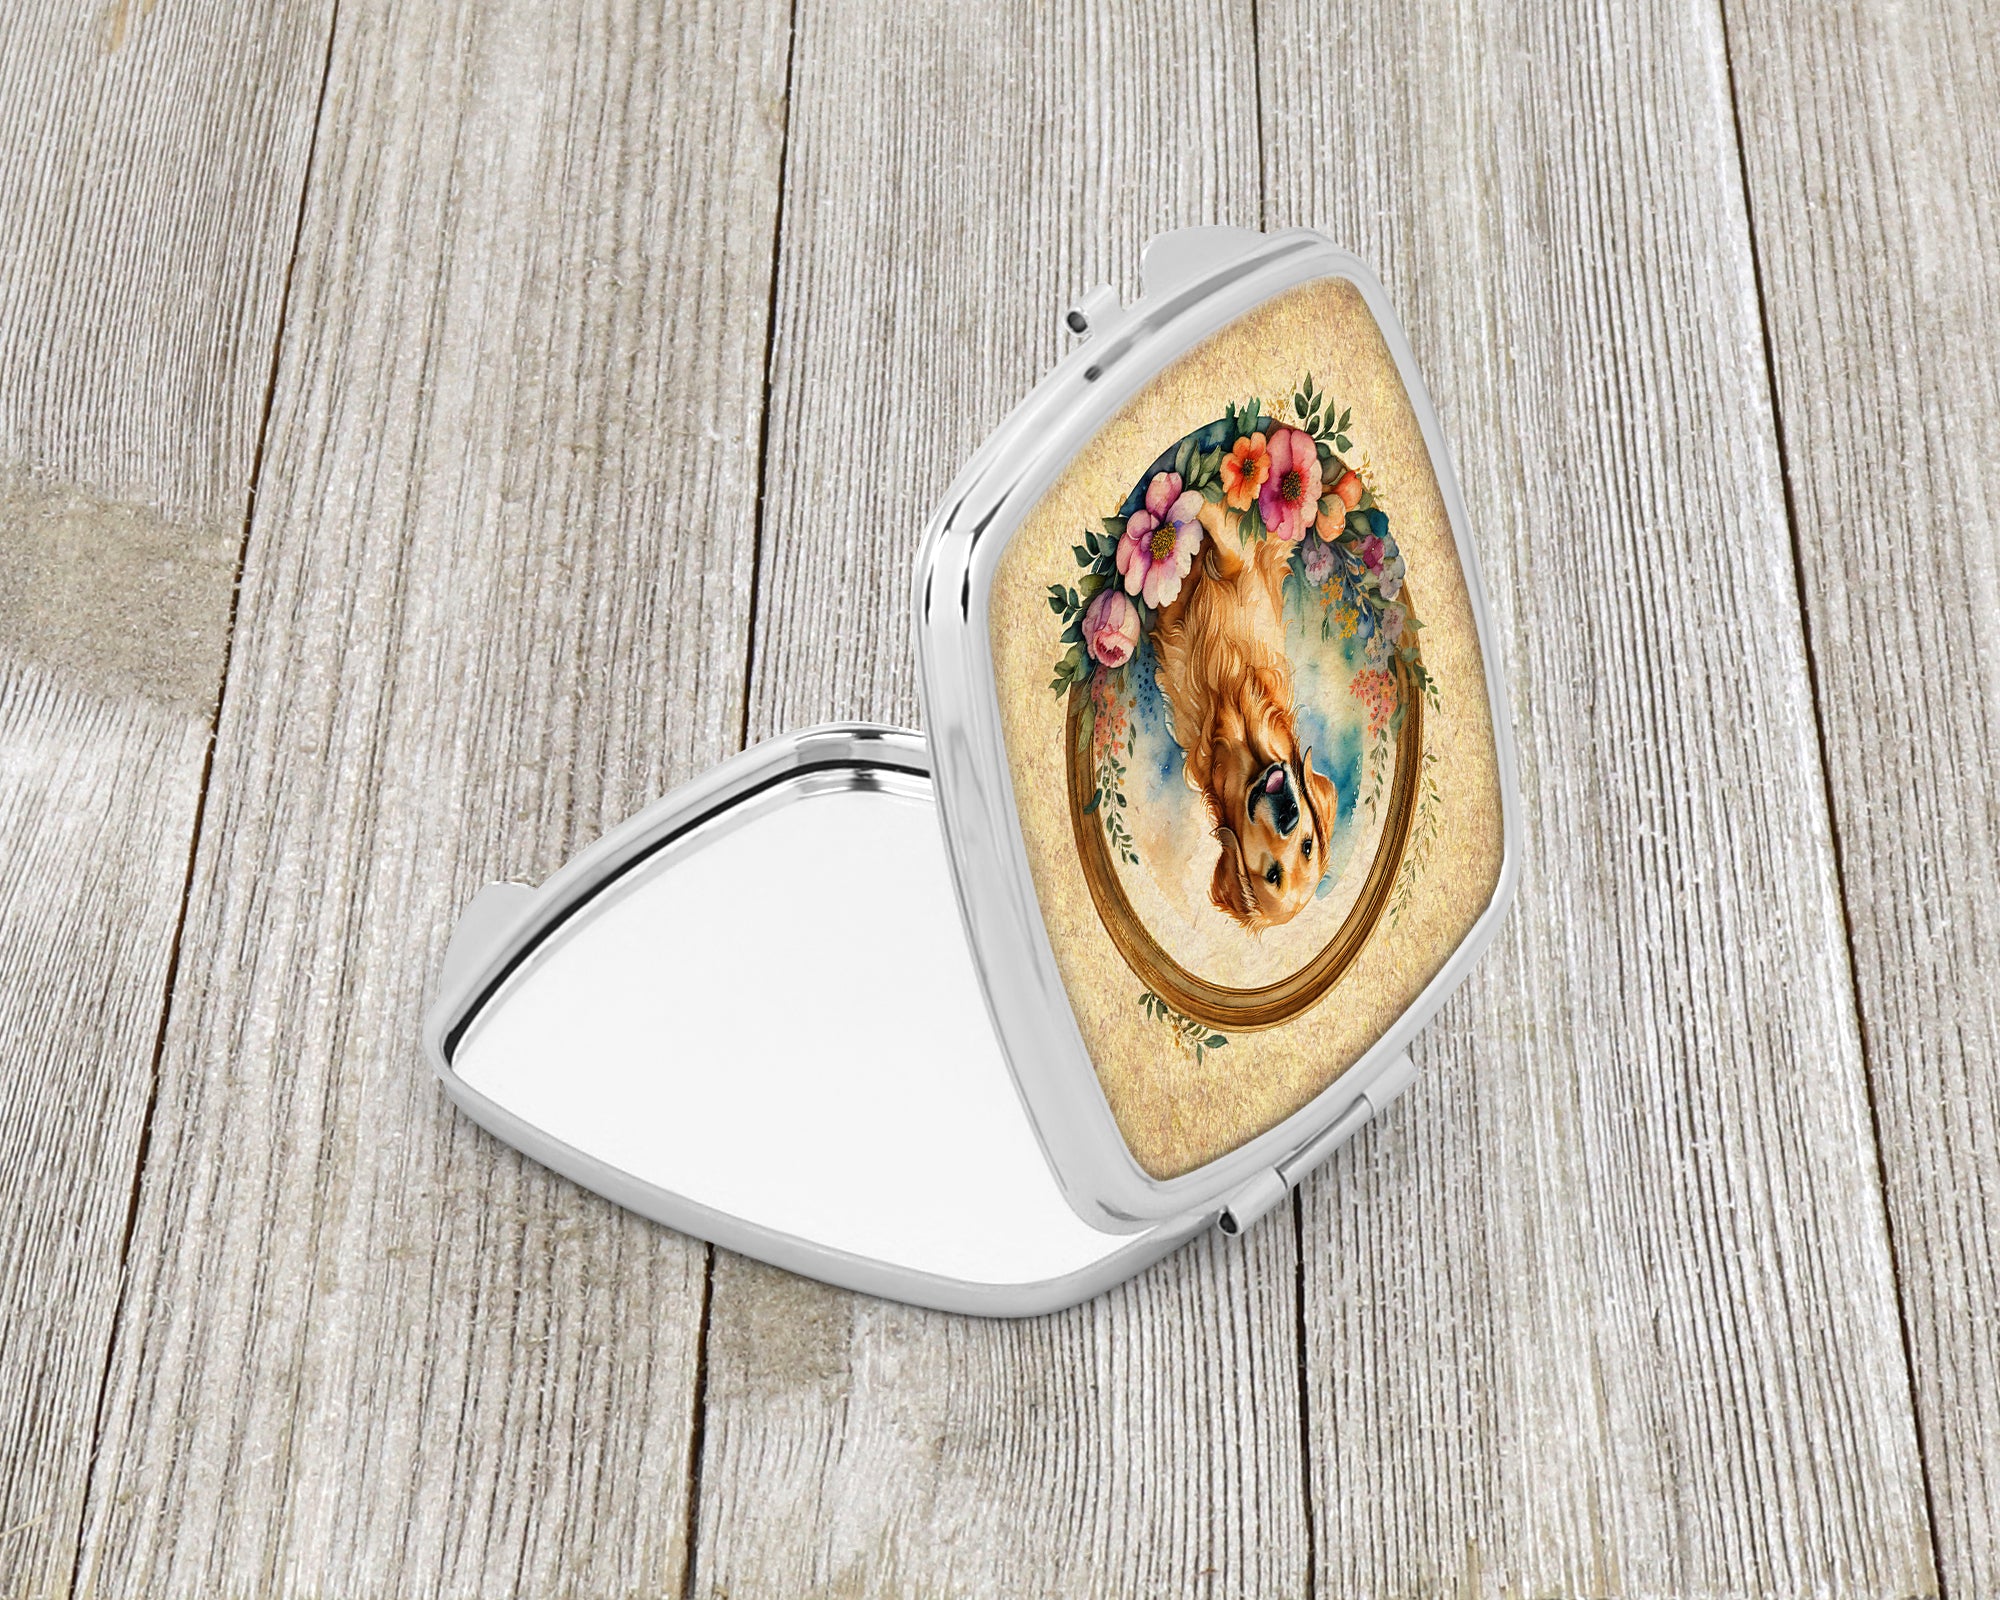 Golden Retriever and Flowers Compact Mirror